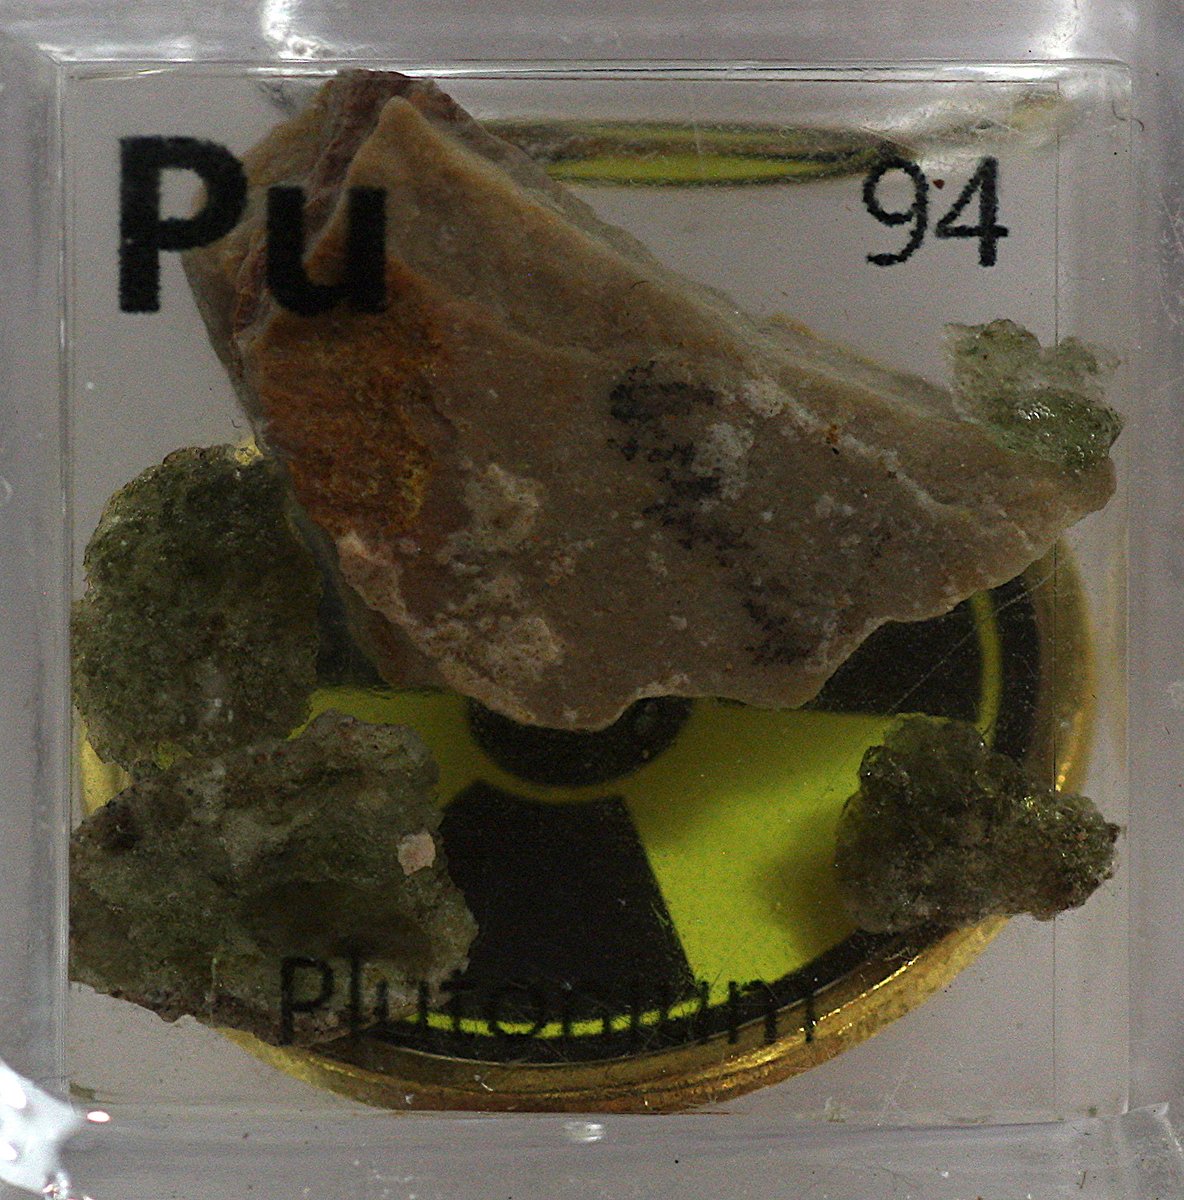 Plutonium  #elementphotos. Uranium ore (brown rock) naturally contains trace amounts of Pu (neutrons from decaying U-238 can strike other U-238 atoms to give Pu). Green glass-like rocks are Trinitite, which is a residue from the 1945 Pu-based Trinity nuclear bomb test.